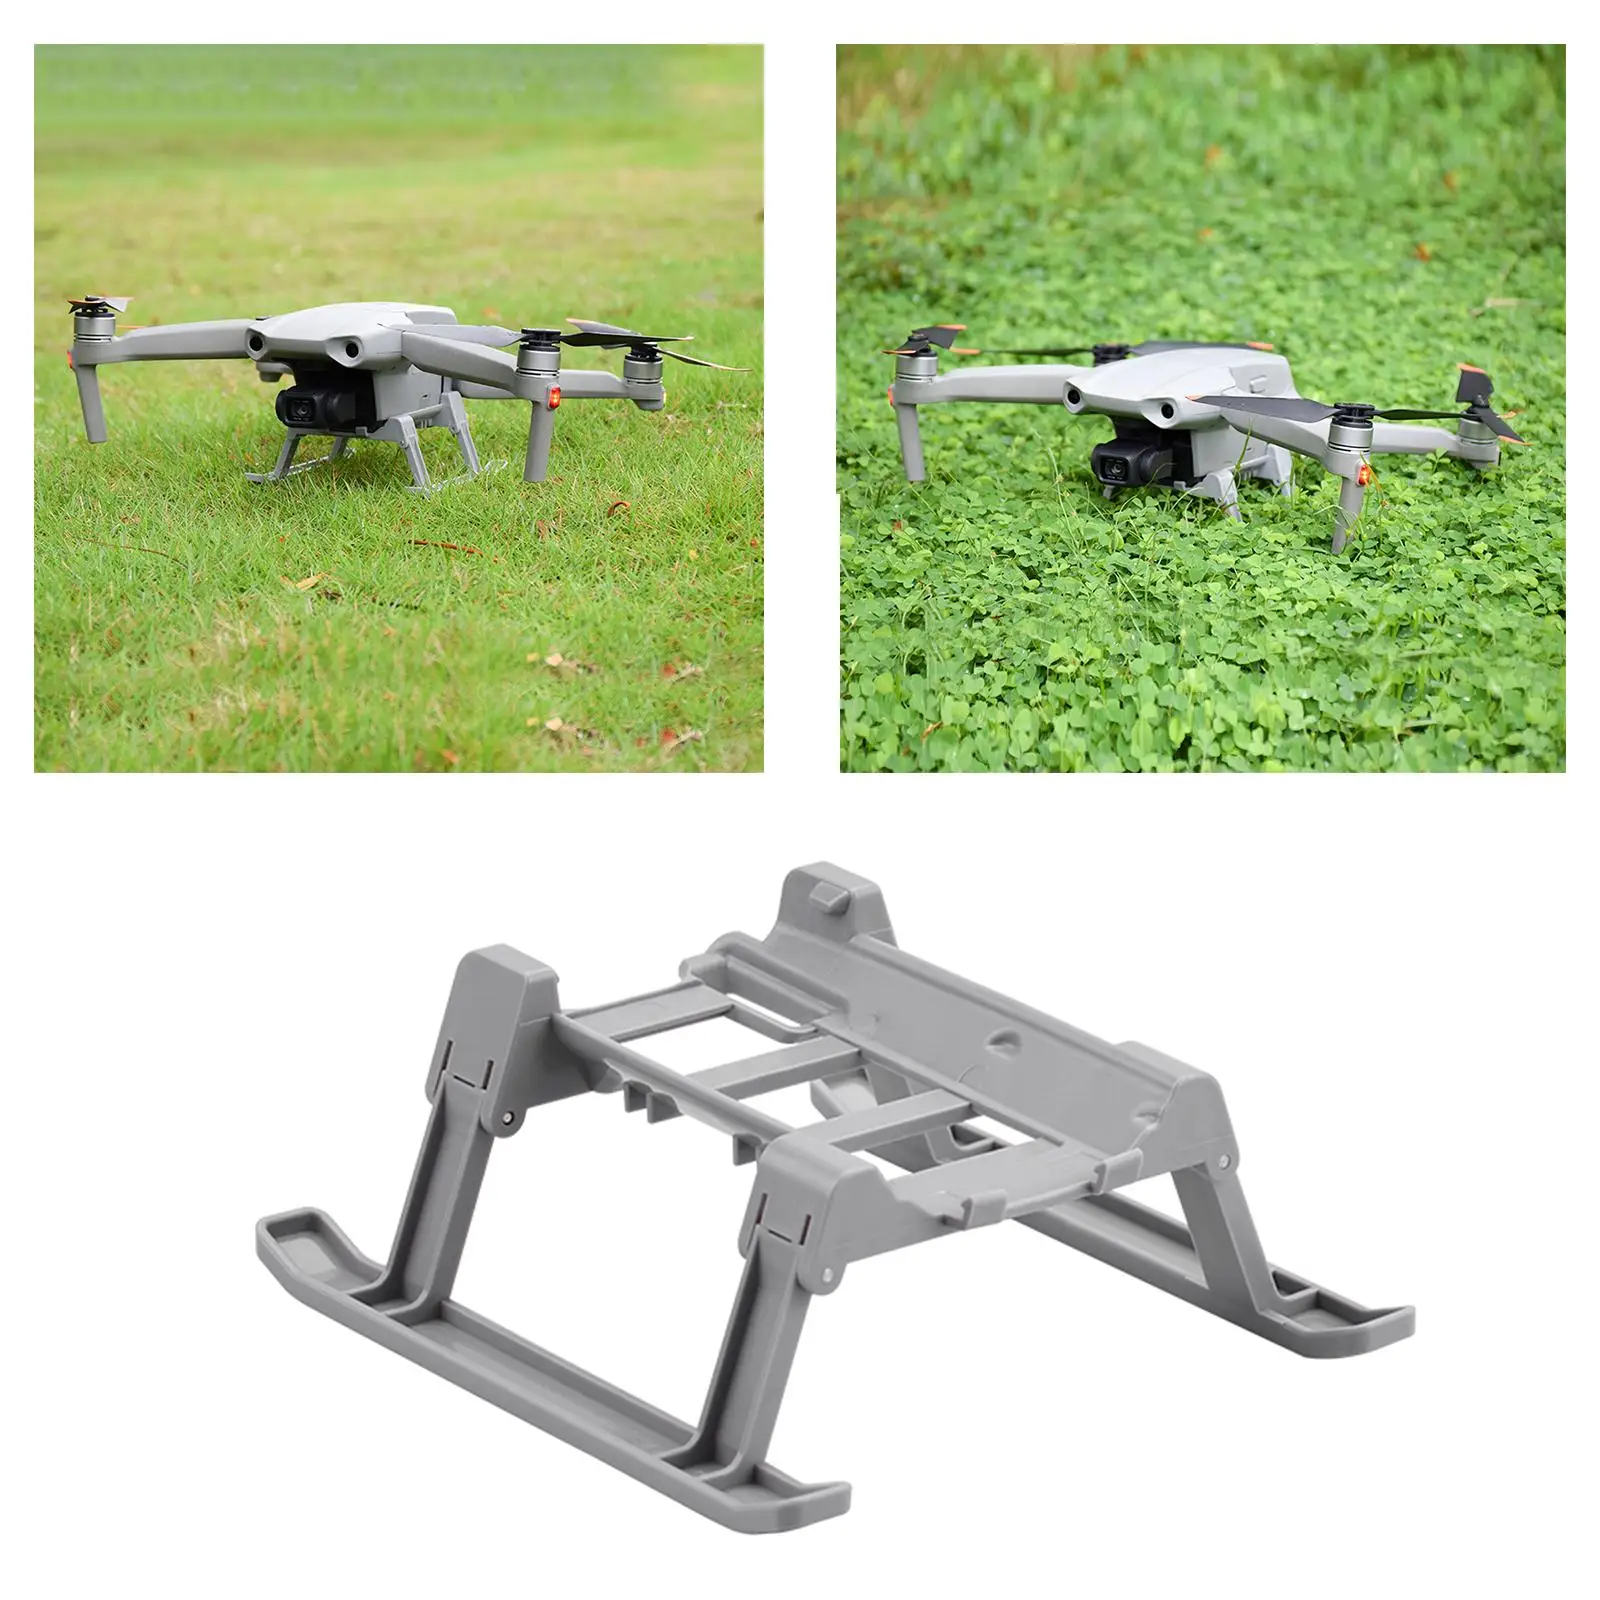 Foldable Landing Gear Leg Height Extender Protector Sled Protection for DJI Mavic Air 2 Drone